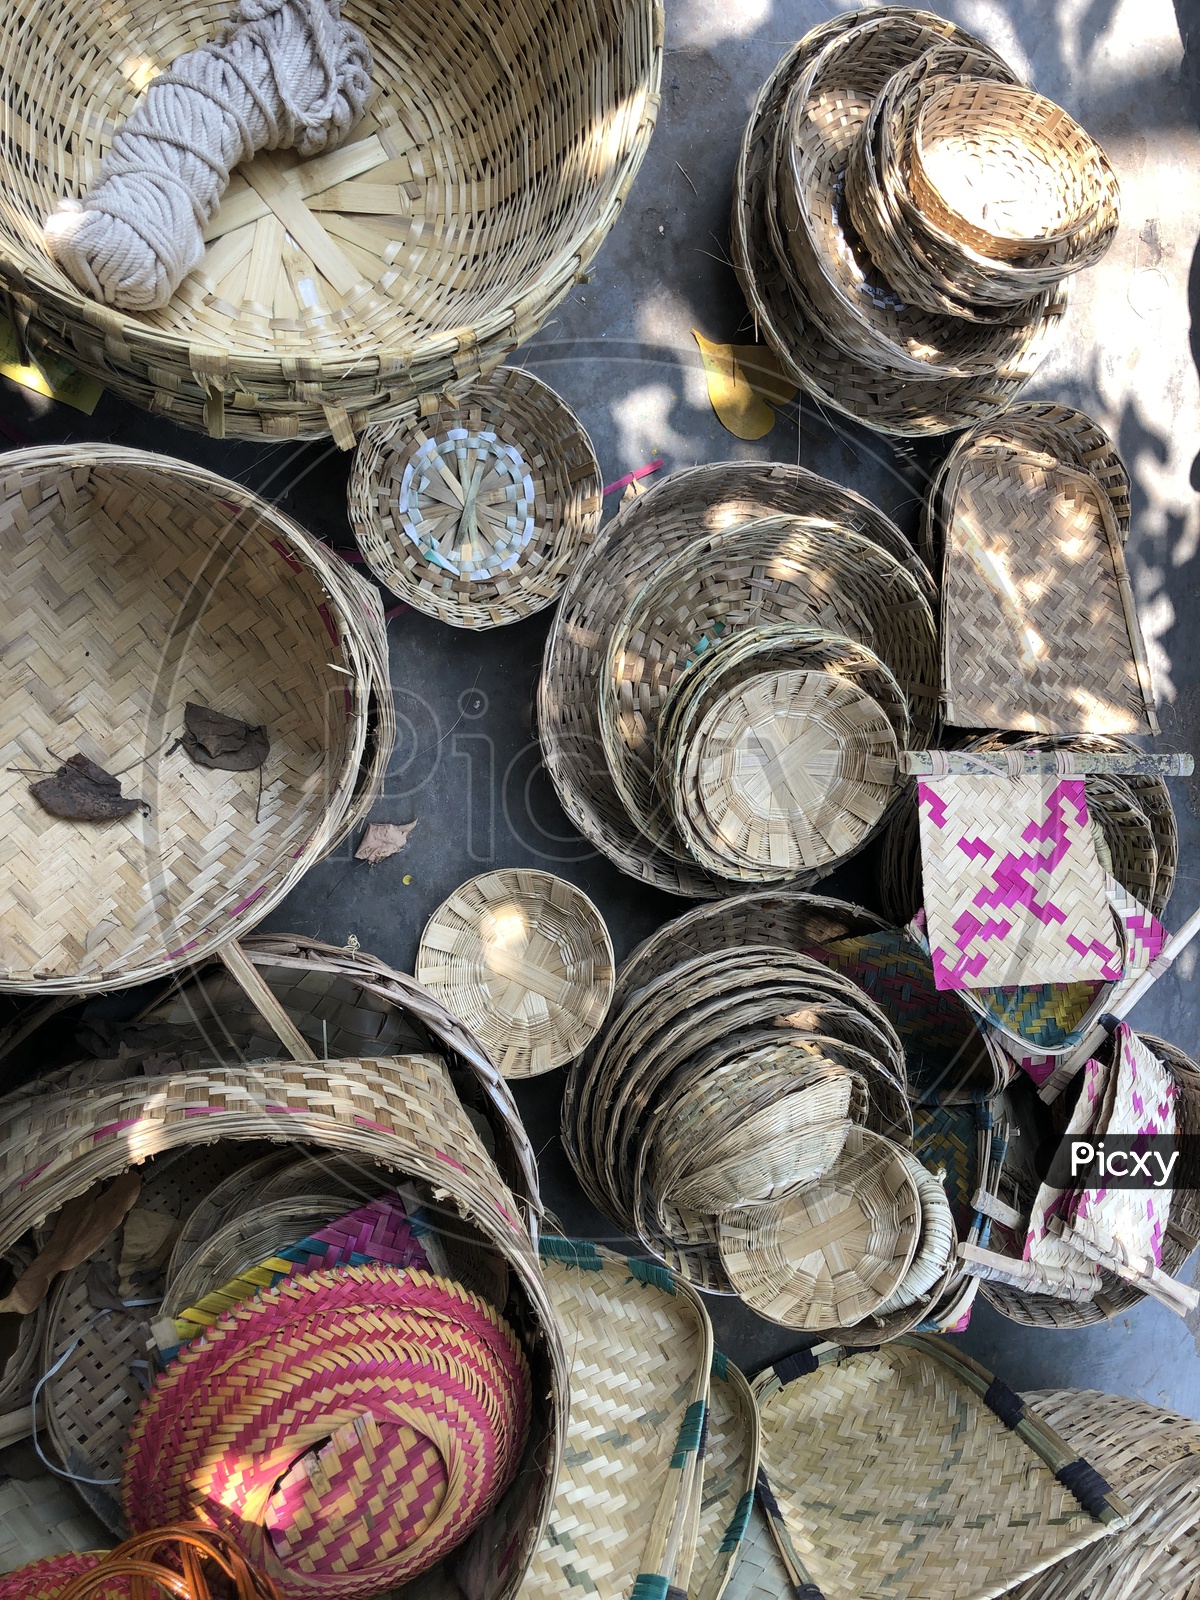 Bamboo Baskets and crafts